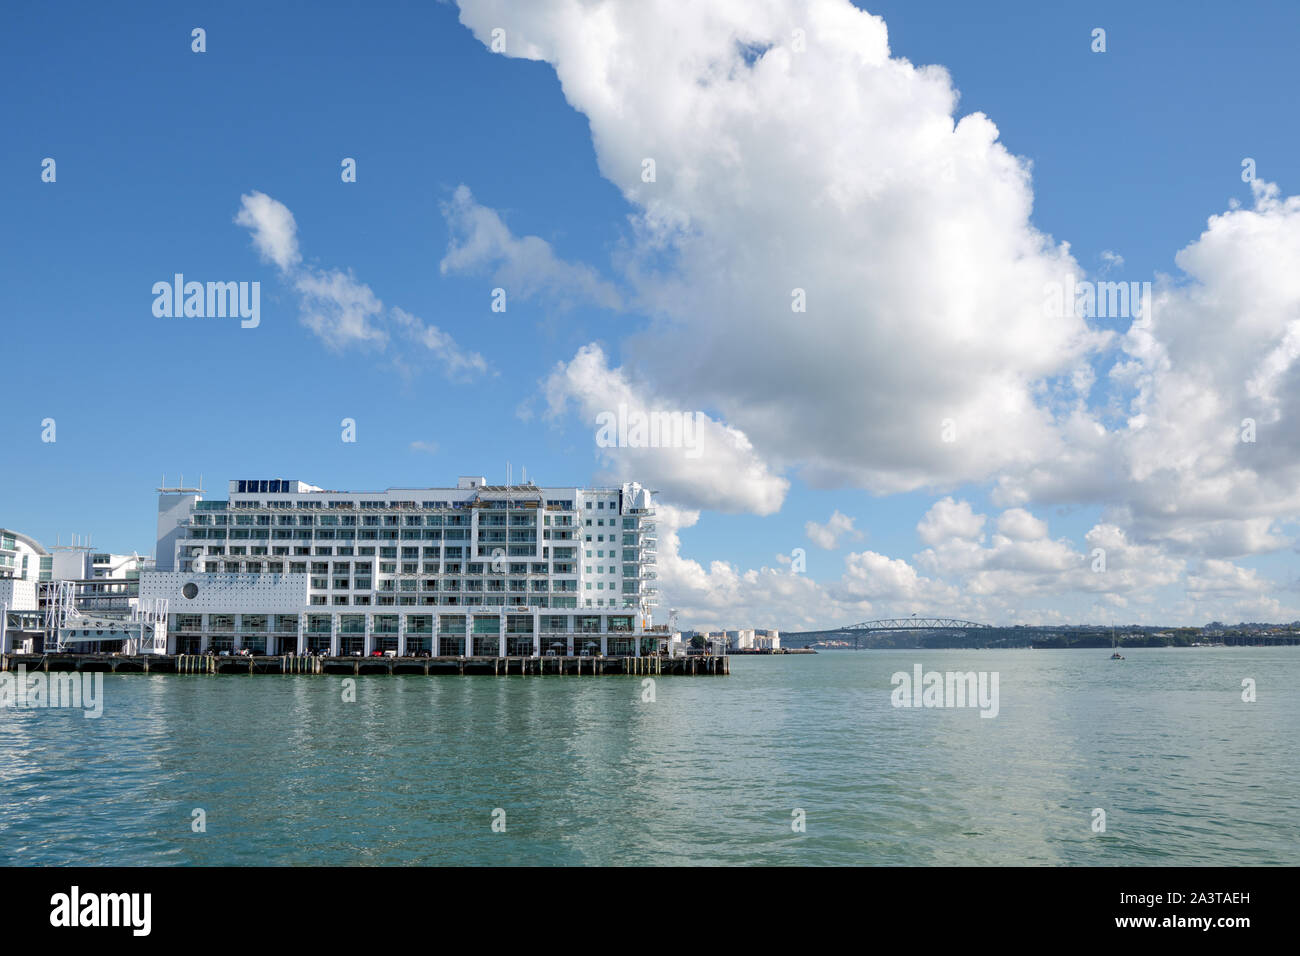 View on the Hilton hotel with Auckland Harbor bridge in the background. Stock Photo